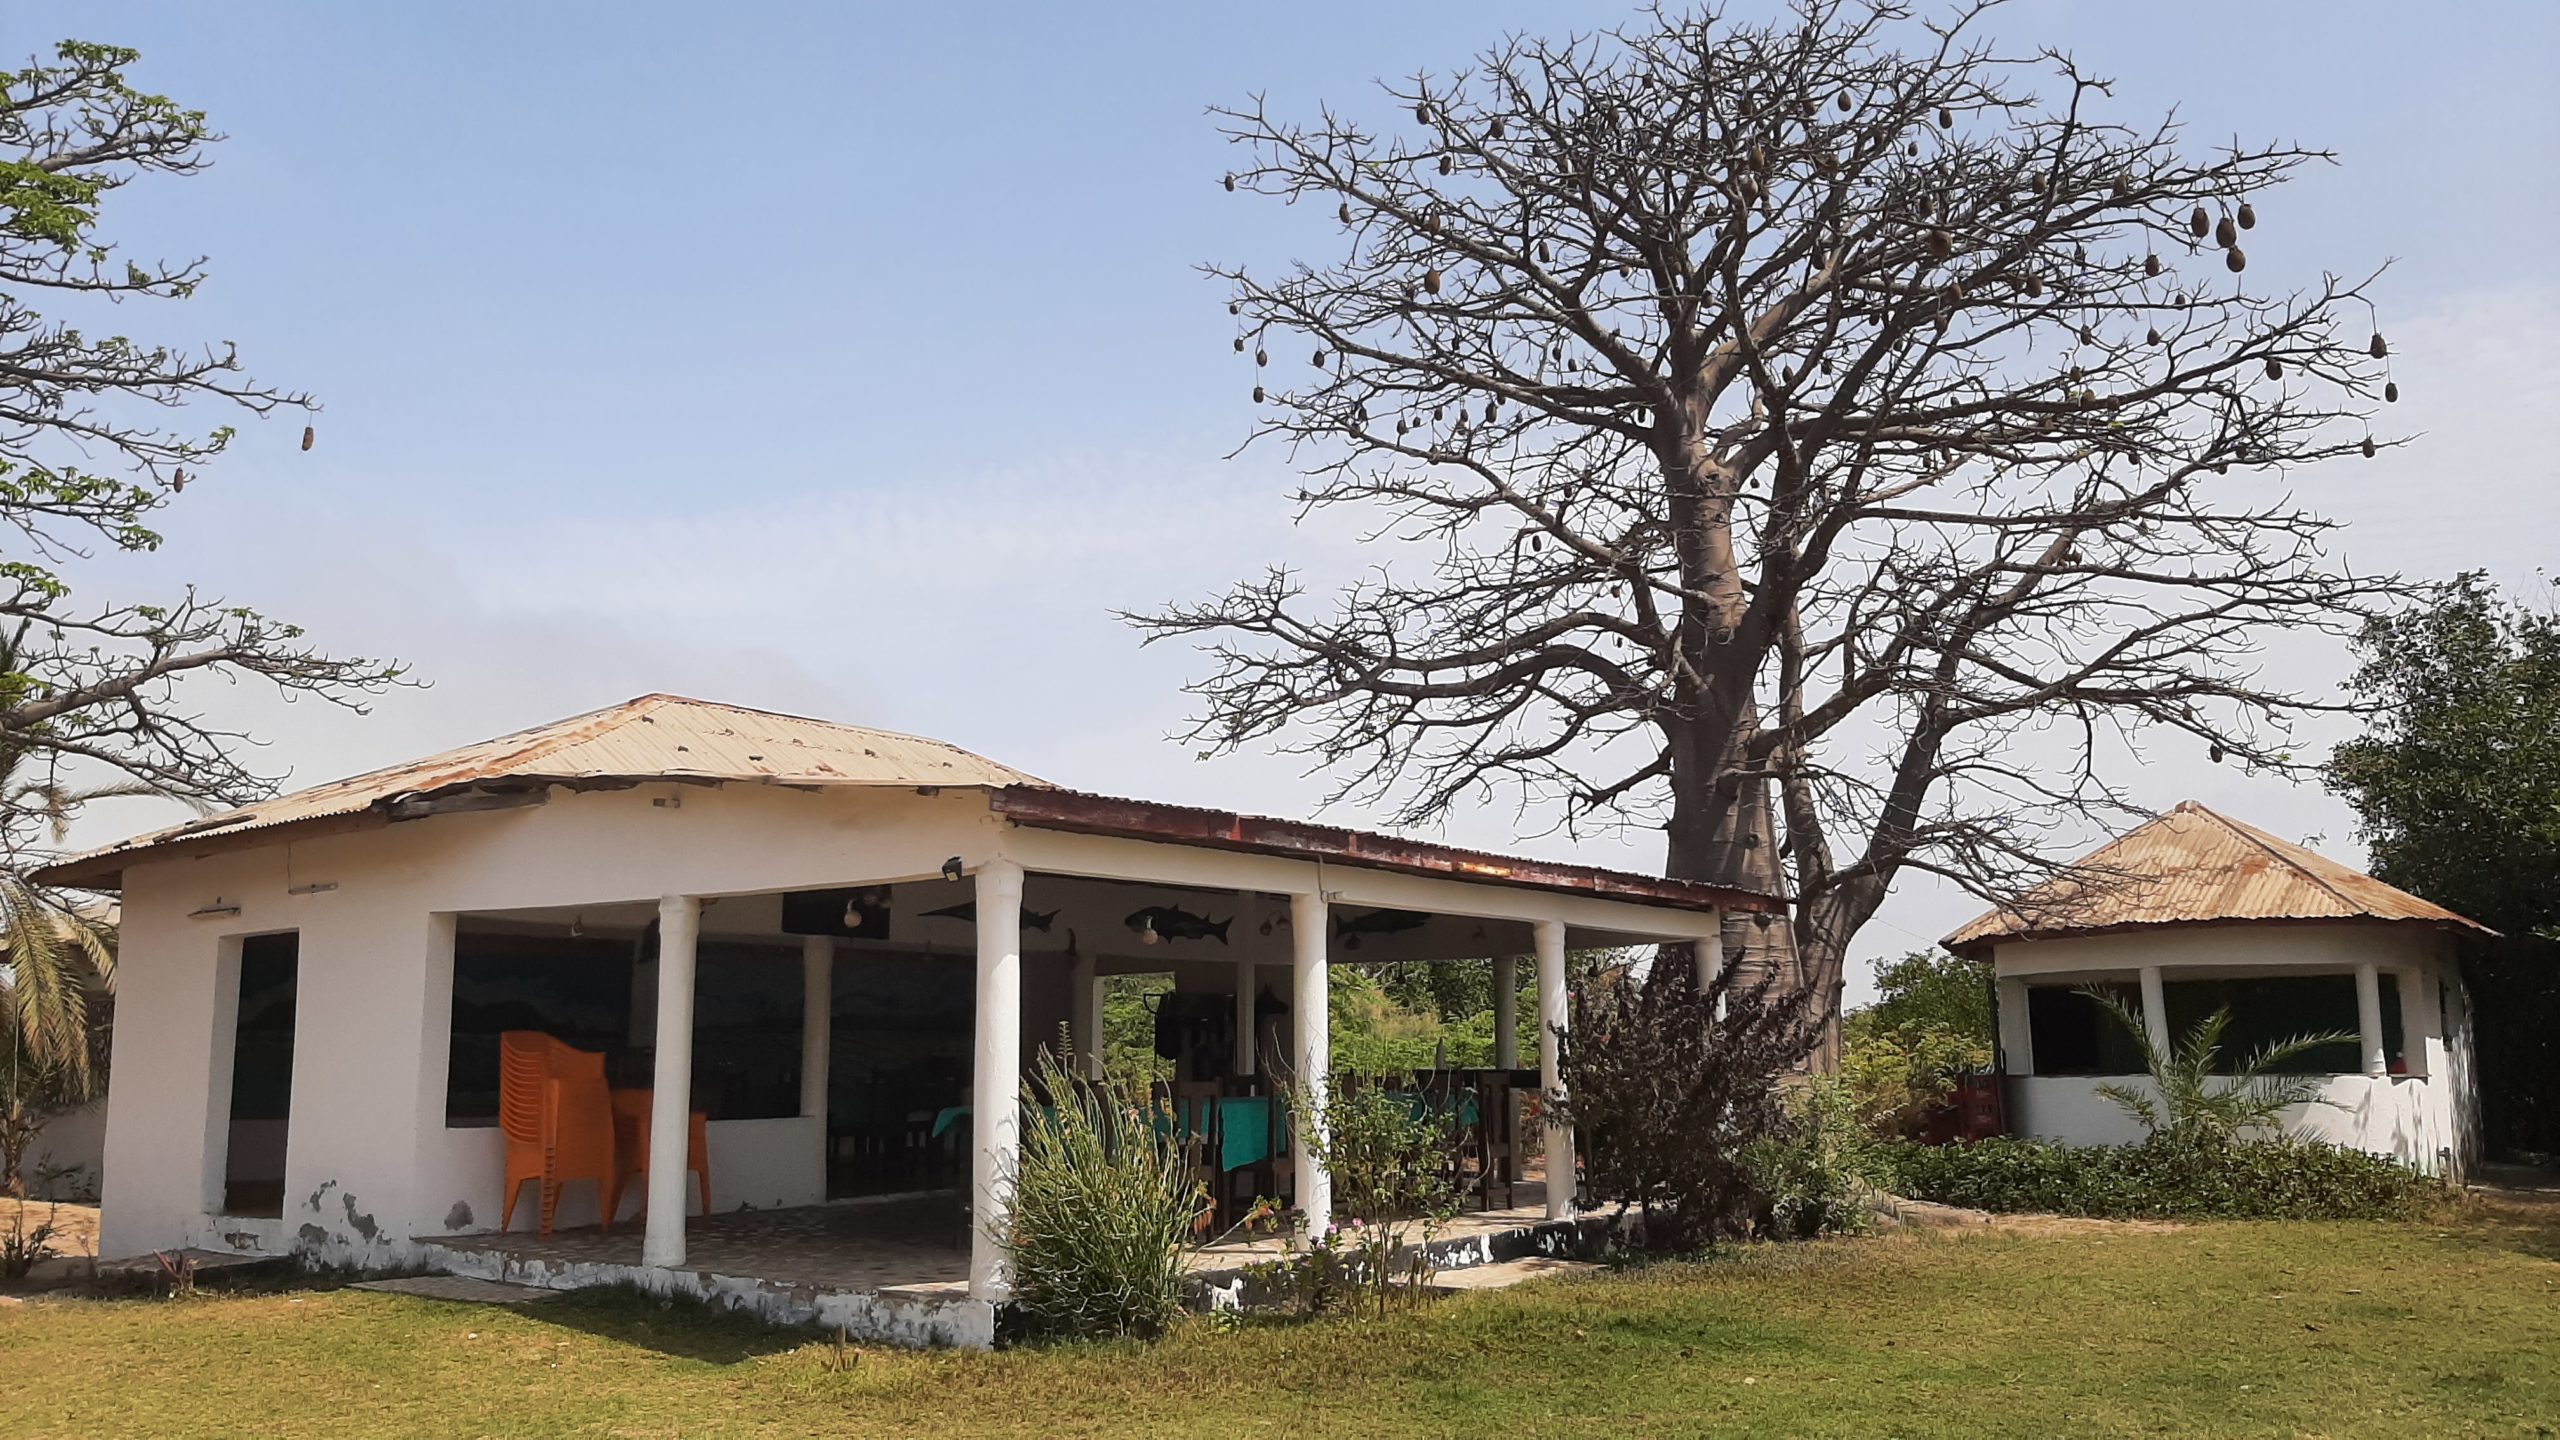 StalaRestaurant 2 scaled - THE GAMBIA: IN THE RIVER DELTA OF THE IDYLLIC ALLAHEIN-RIVER AND DIRECTLY ON THE ATLANTIC, THE STALA ADVENTURE LODGE BECKONS WITH 'PETS ❤️-WELCOME'